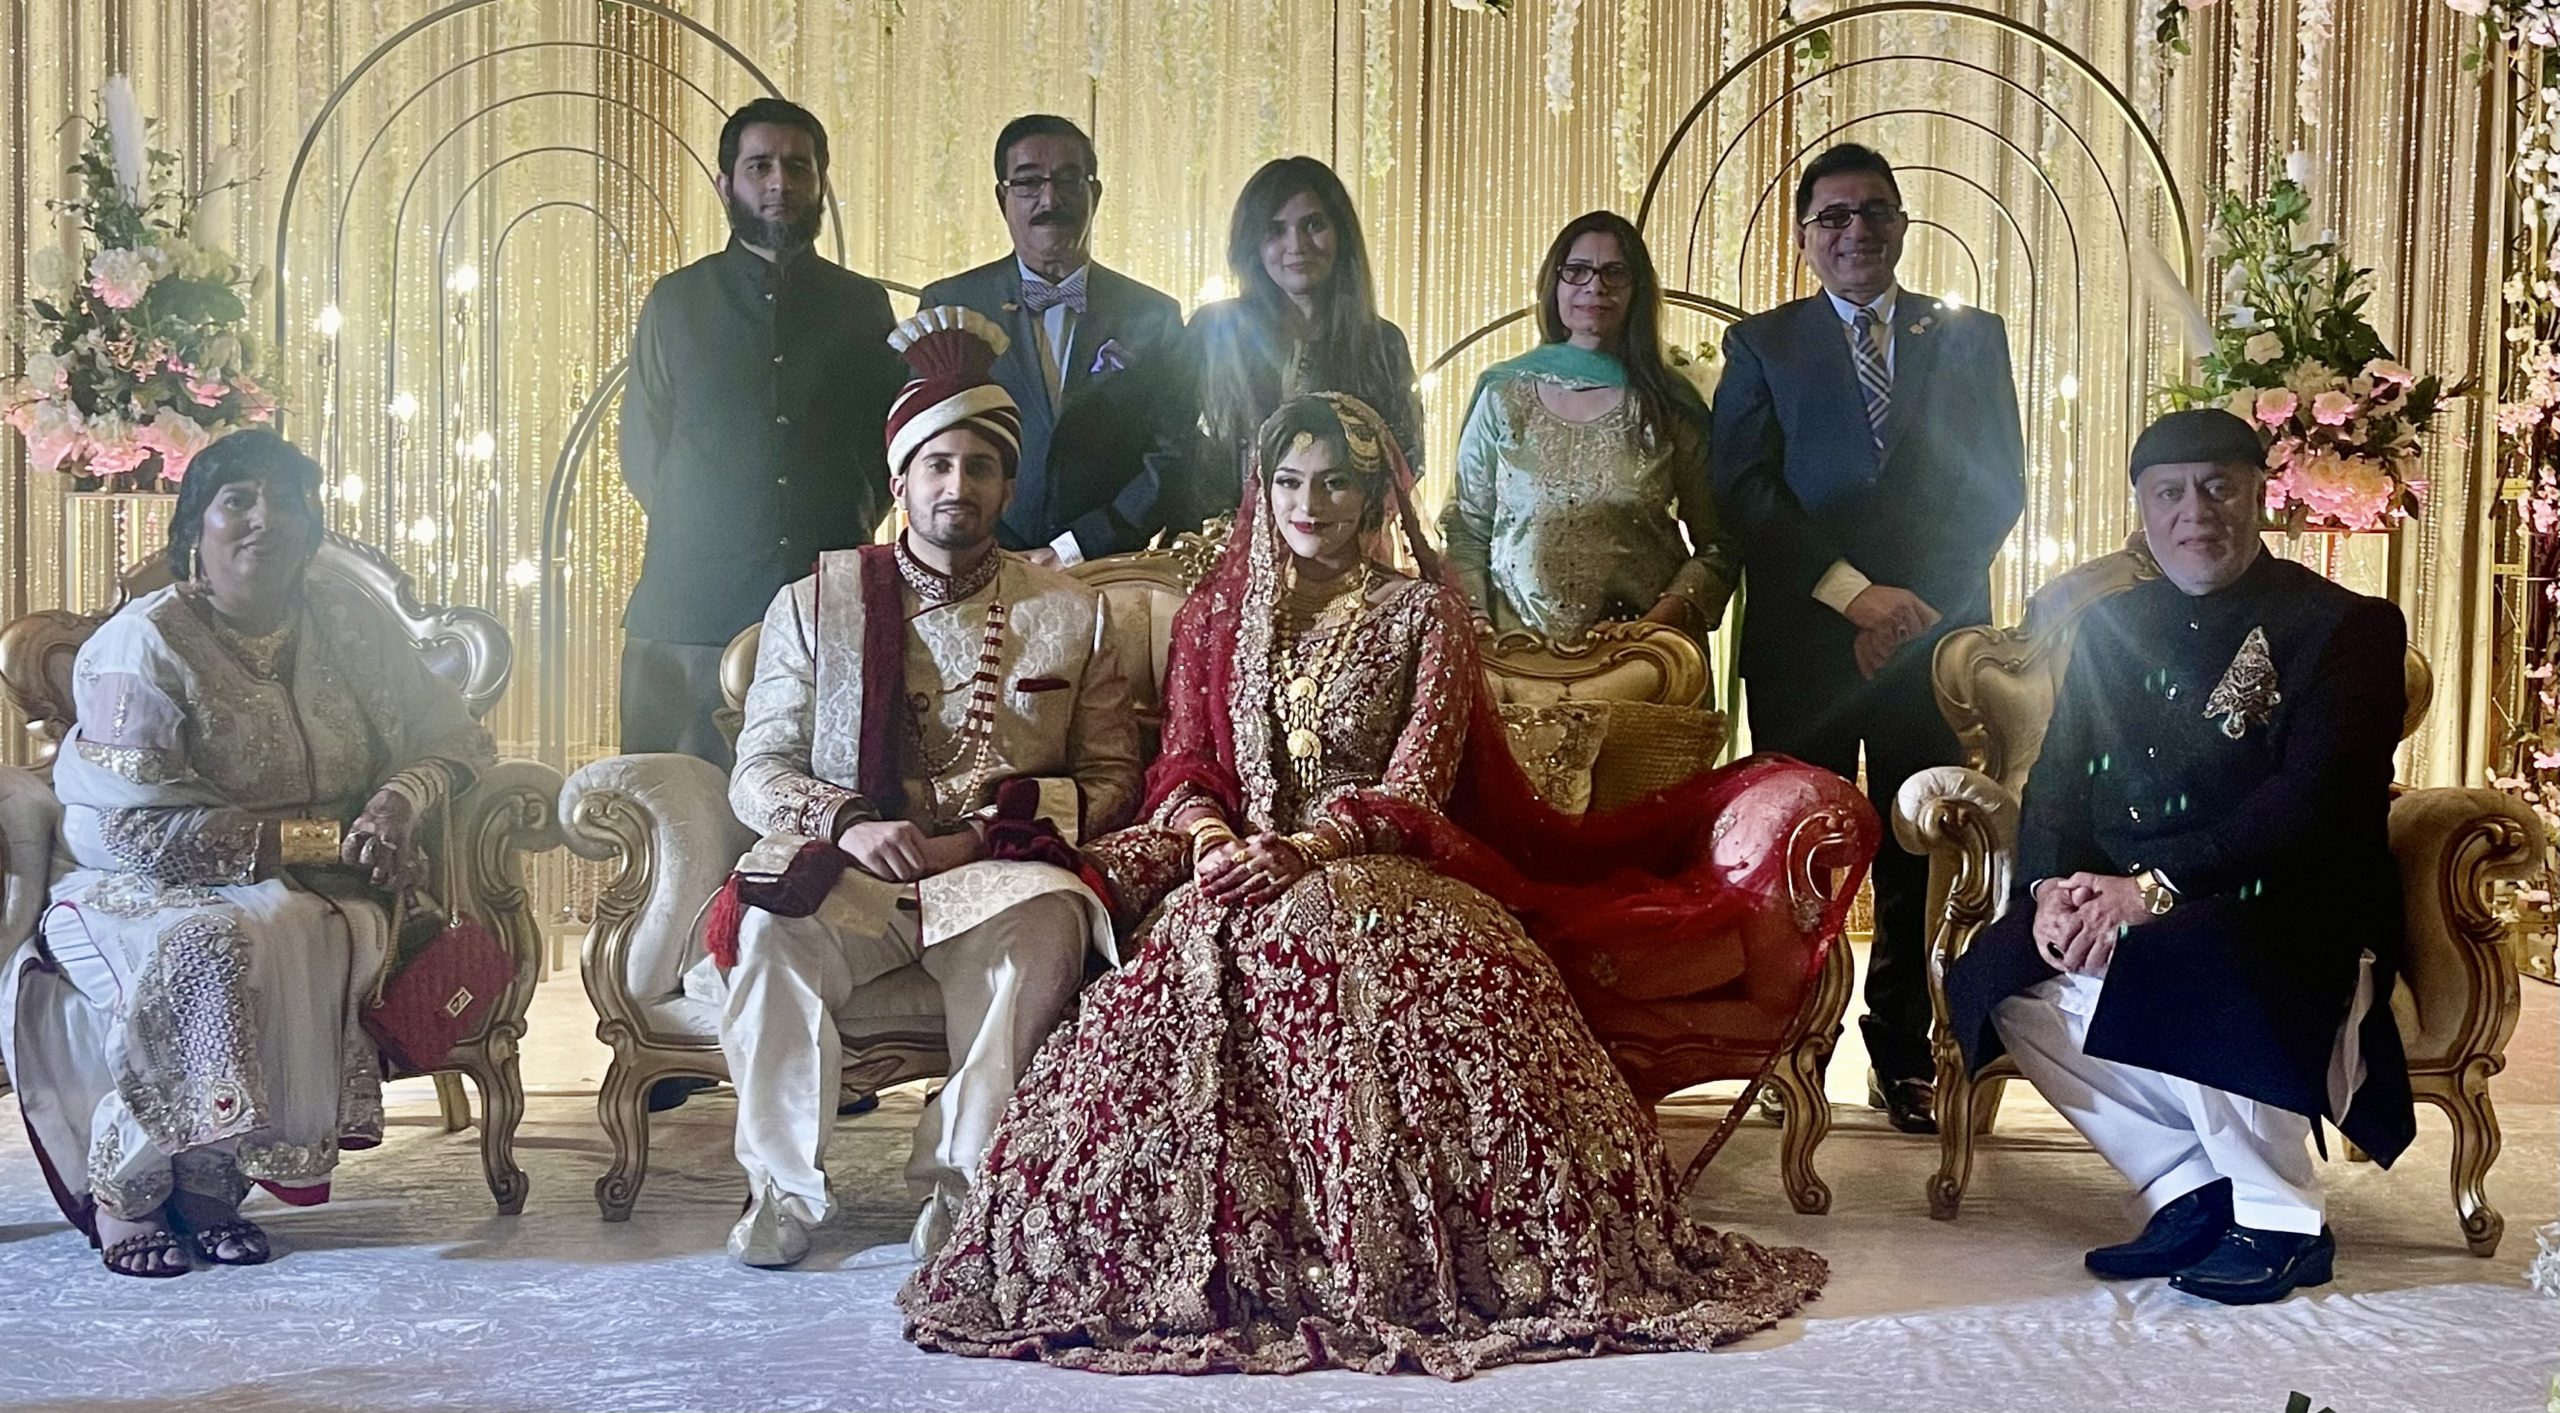 Shahid Latif's daughter Sanam Shahid's wedding ceremony was held at Hotel Hyatt Regency Hotel in Dallas Downtown on this occasion. Pictures talking with groom bride, Former President Yaqub Sheikh The Jago Times Group Editor-in-Chief Raja Zahid KhanzadaThe Jago Times President Dr. Nasreen and other in the group photo.